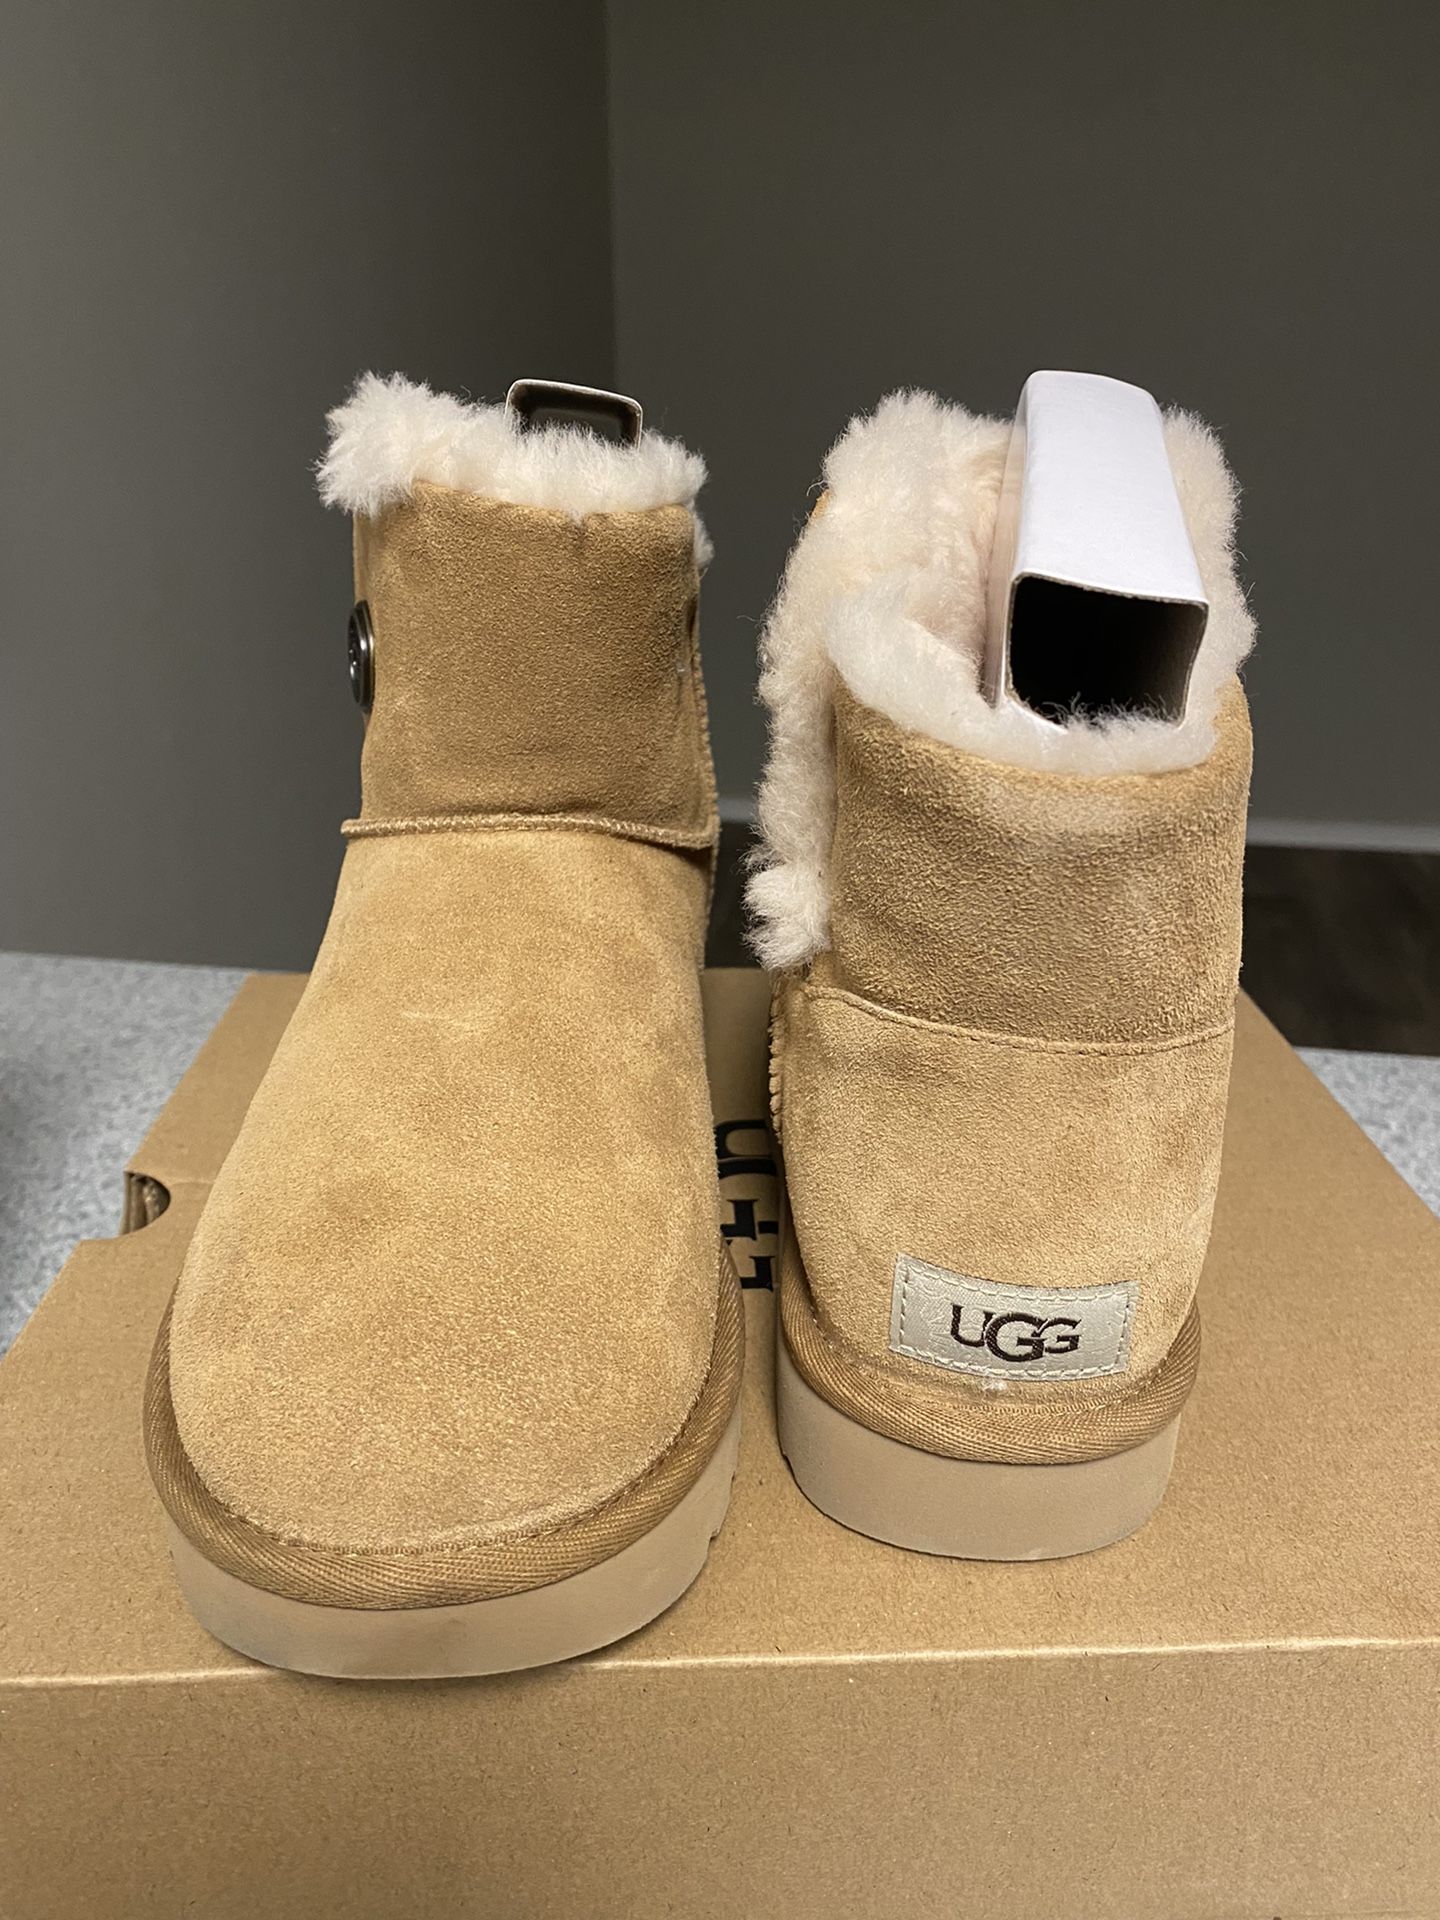 Selling Ugg Boots